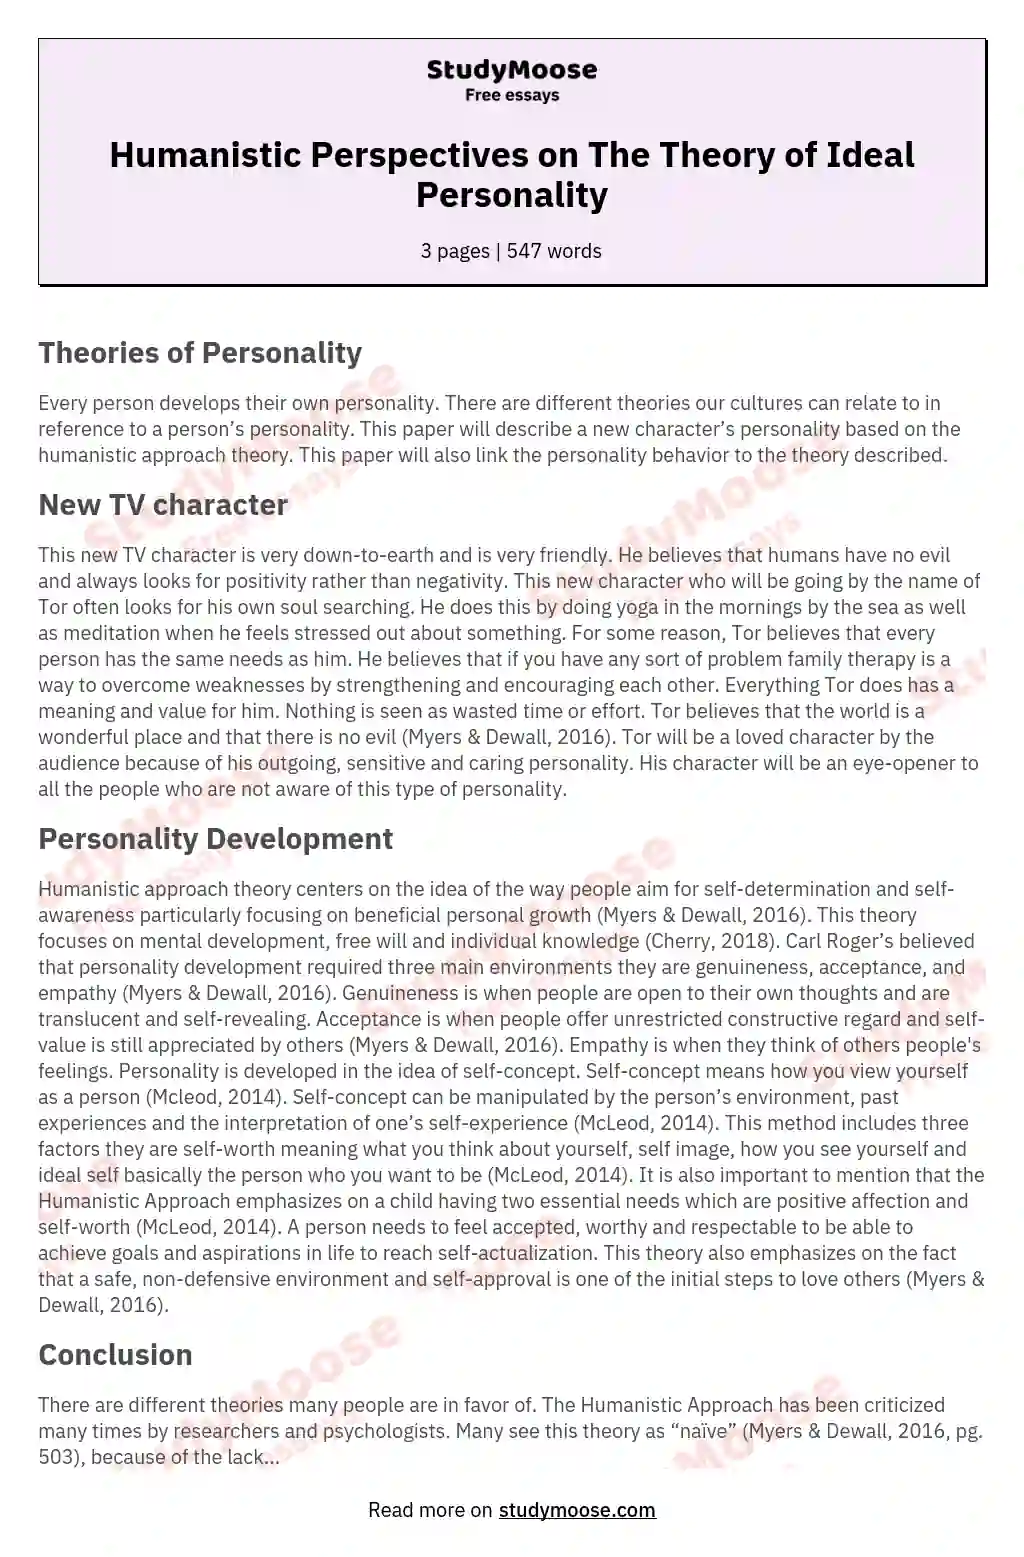 Humanistic Perspectives on The Theory of Ideal Personality essay